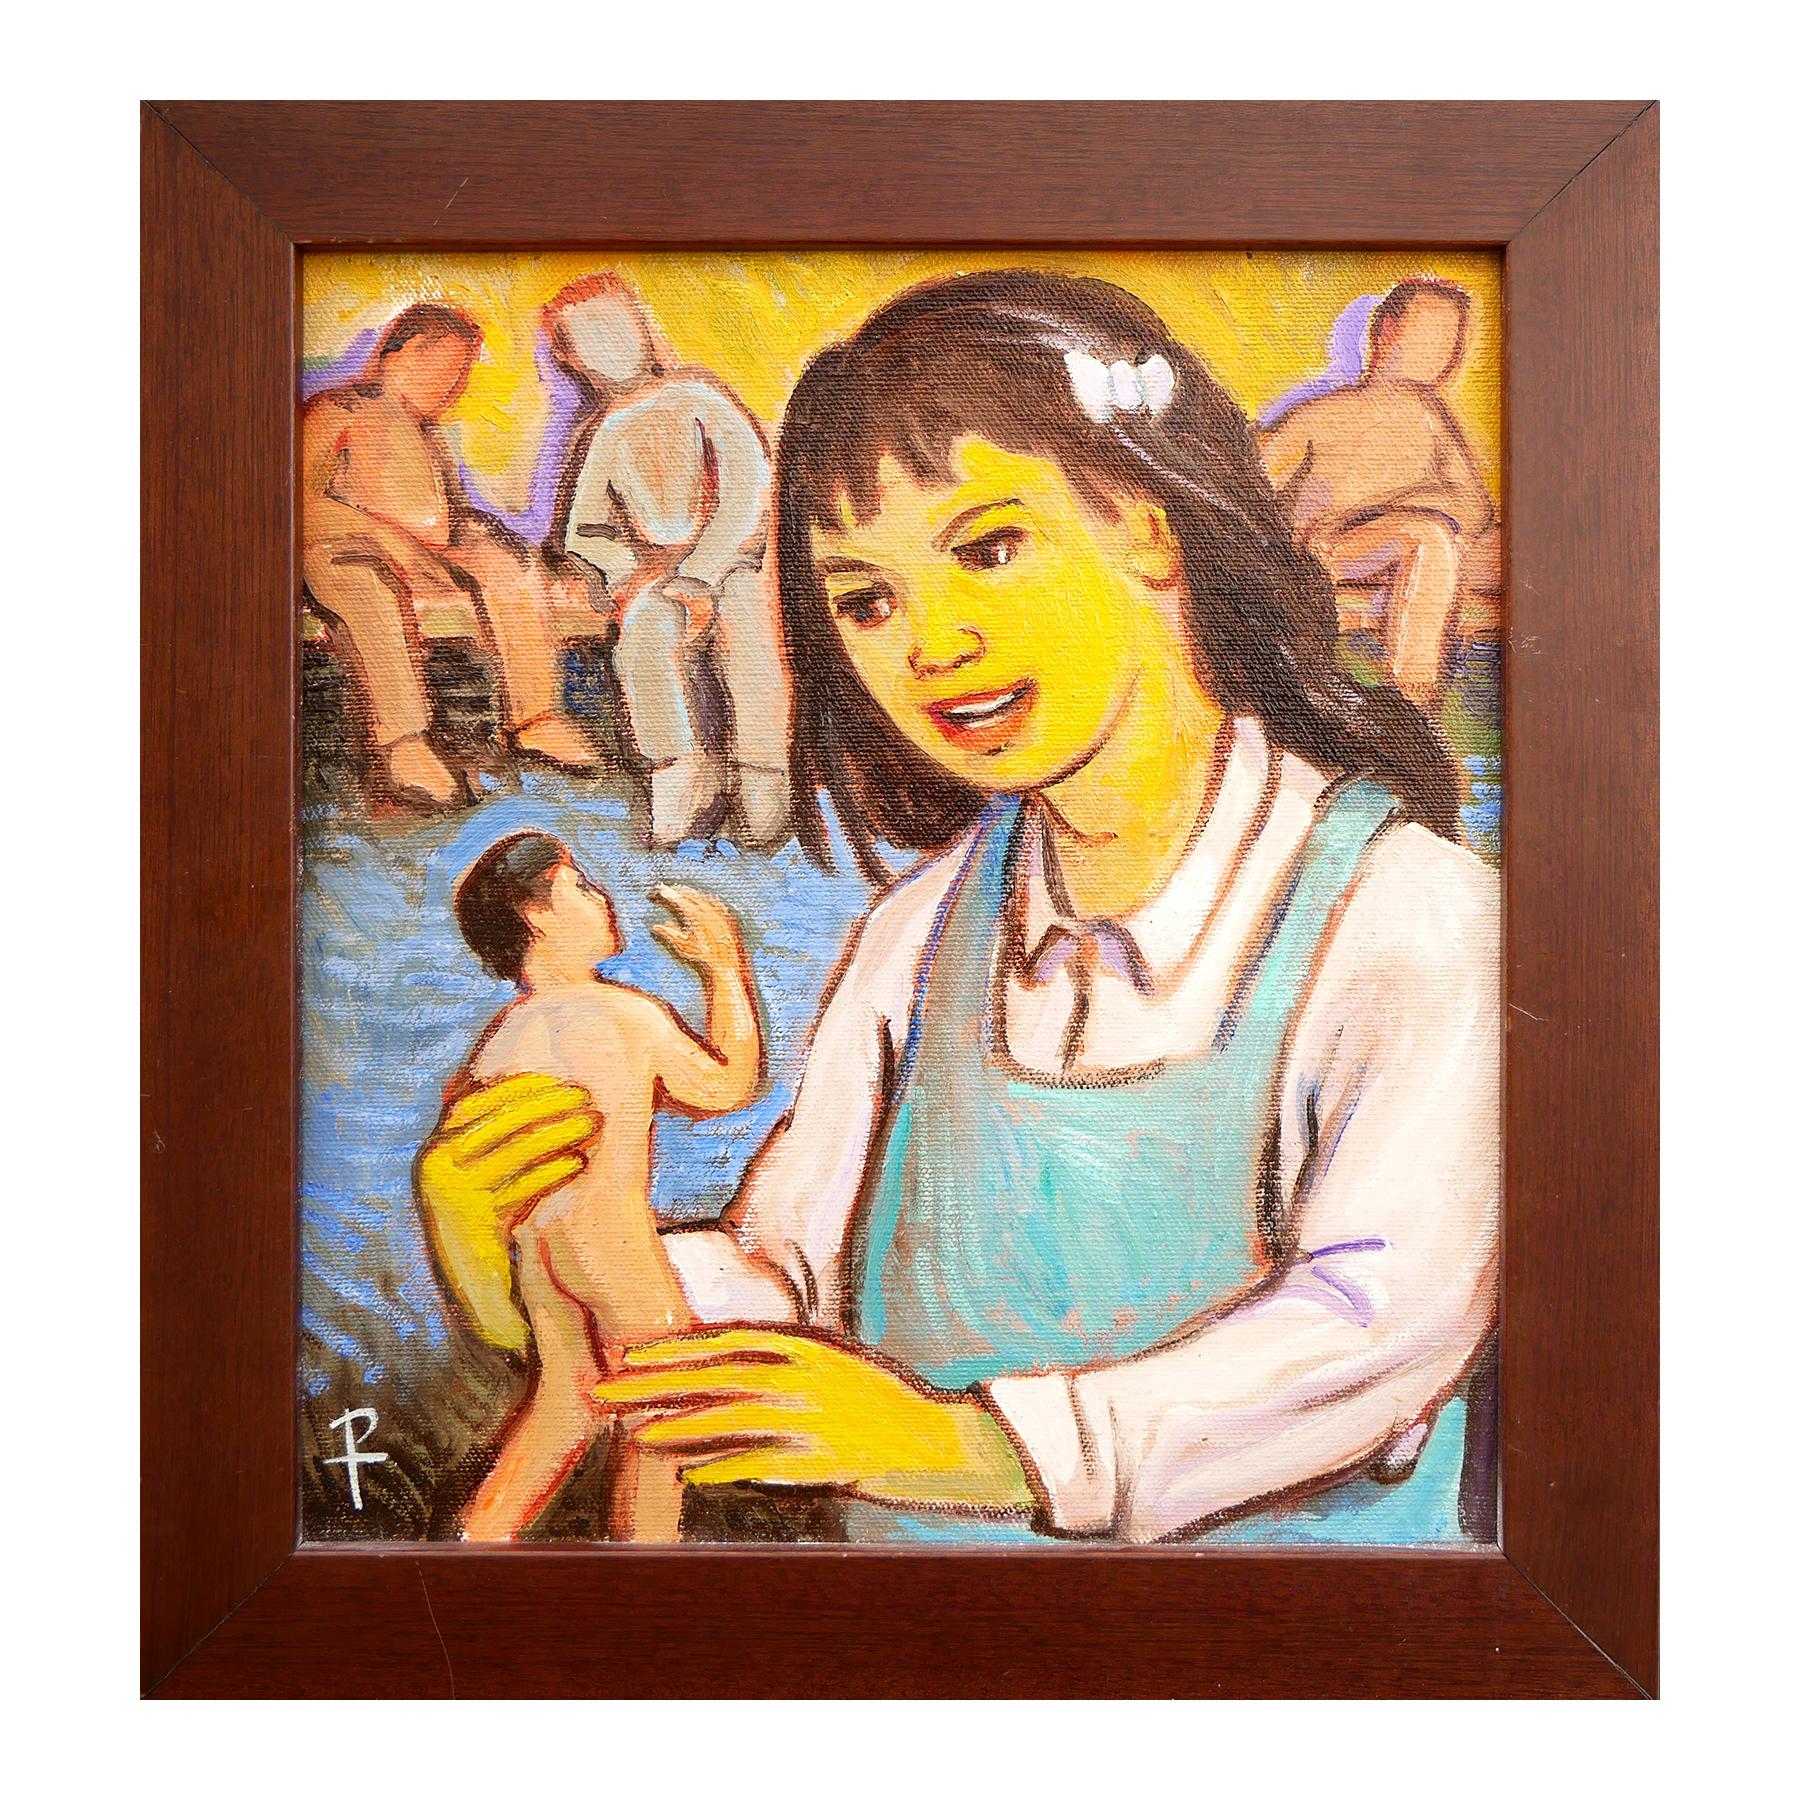 Pastel-toned surrealist painting done by contemporary artist Henry David Potwin. This work features a girl figure with yellow-toned skin playing with a smaller nude, doll figure. Signed at bottom left corner. Titled and dated on reverse. Currently